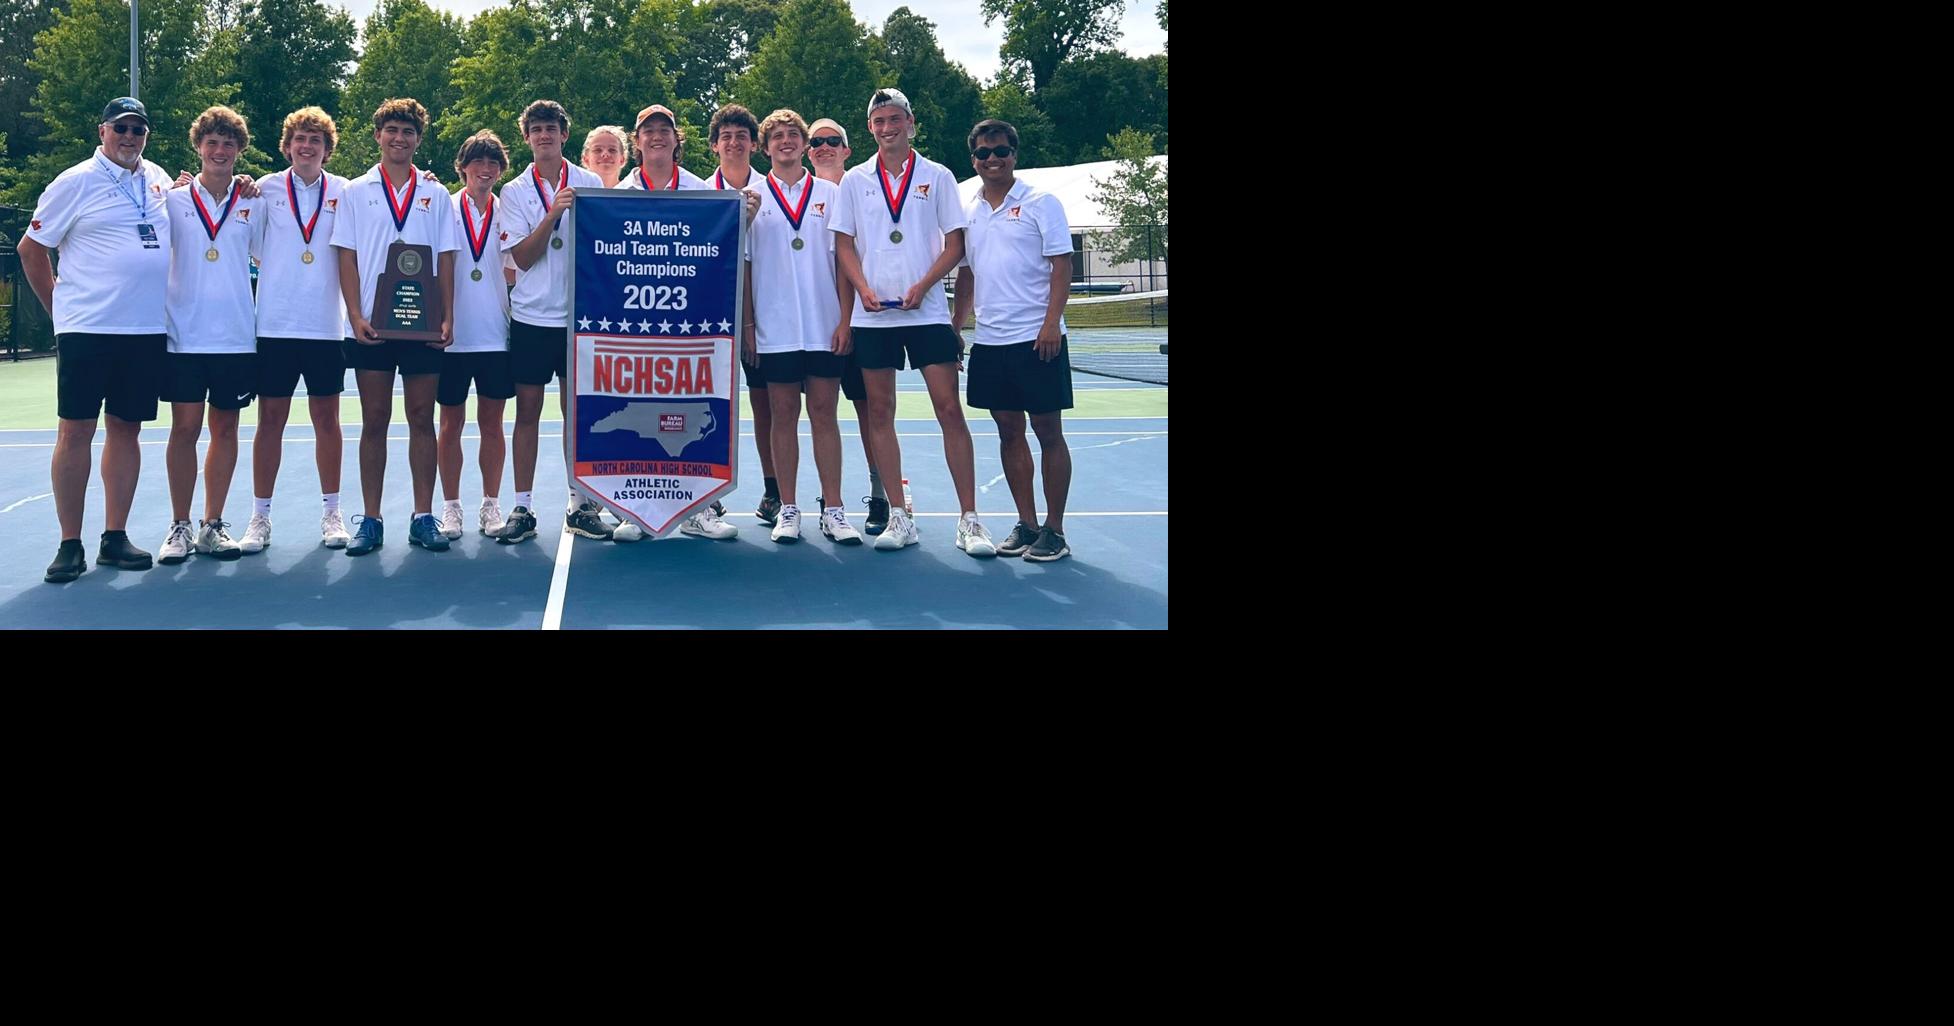 Hickory defeats Carrboro 5-4 to capture 3A state tennis championship